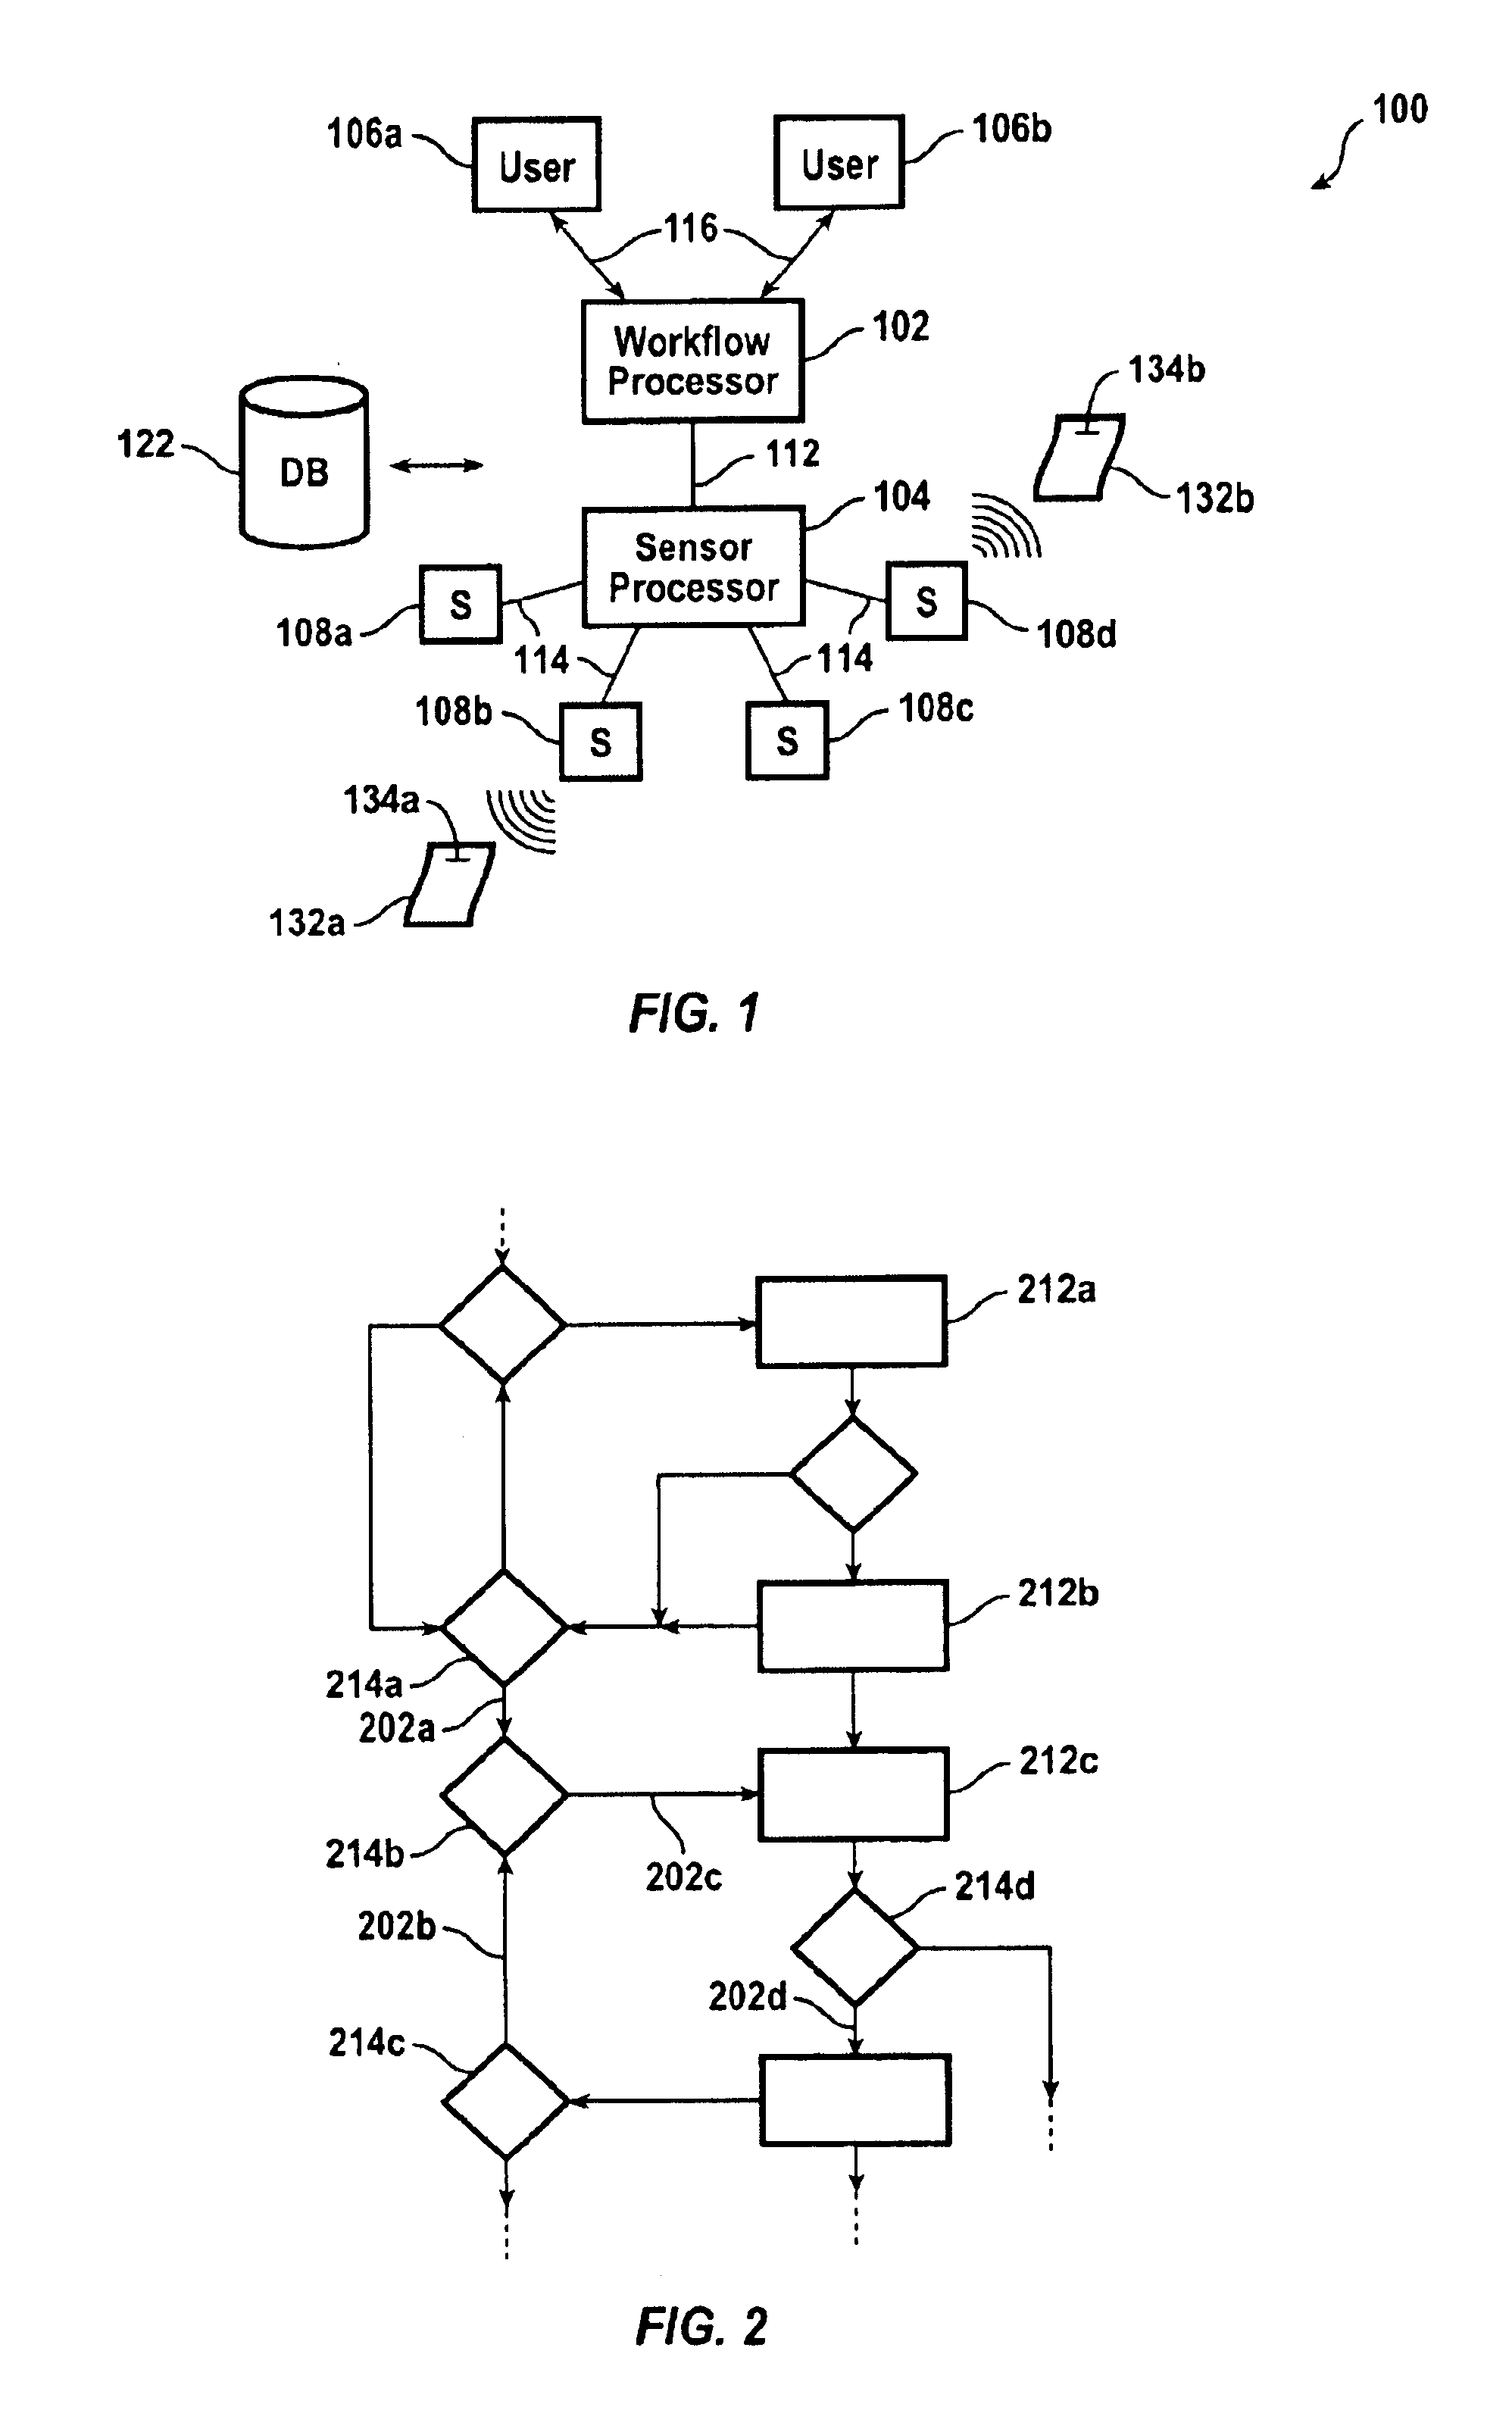 Method and apparatus for tracking documents in a workflow